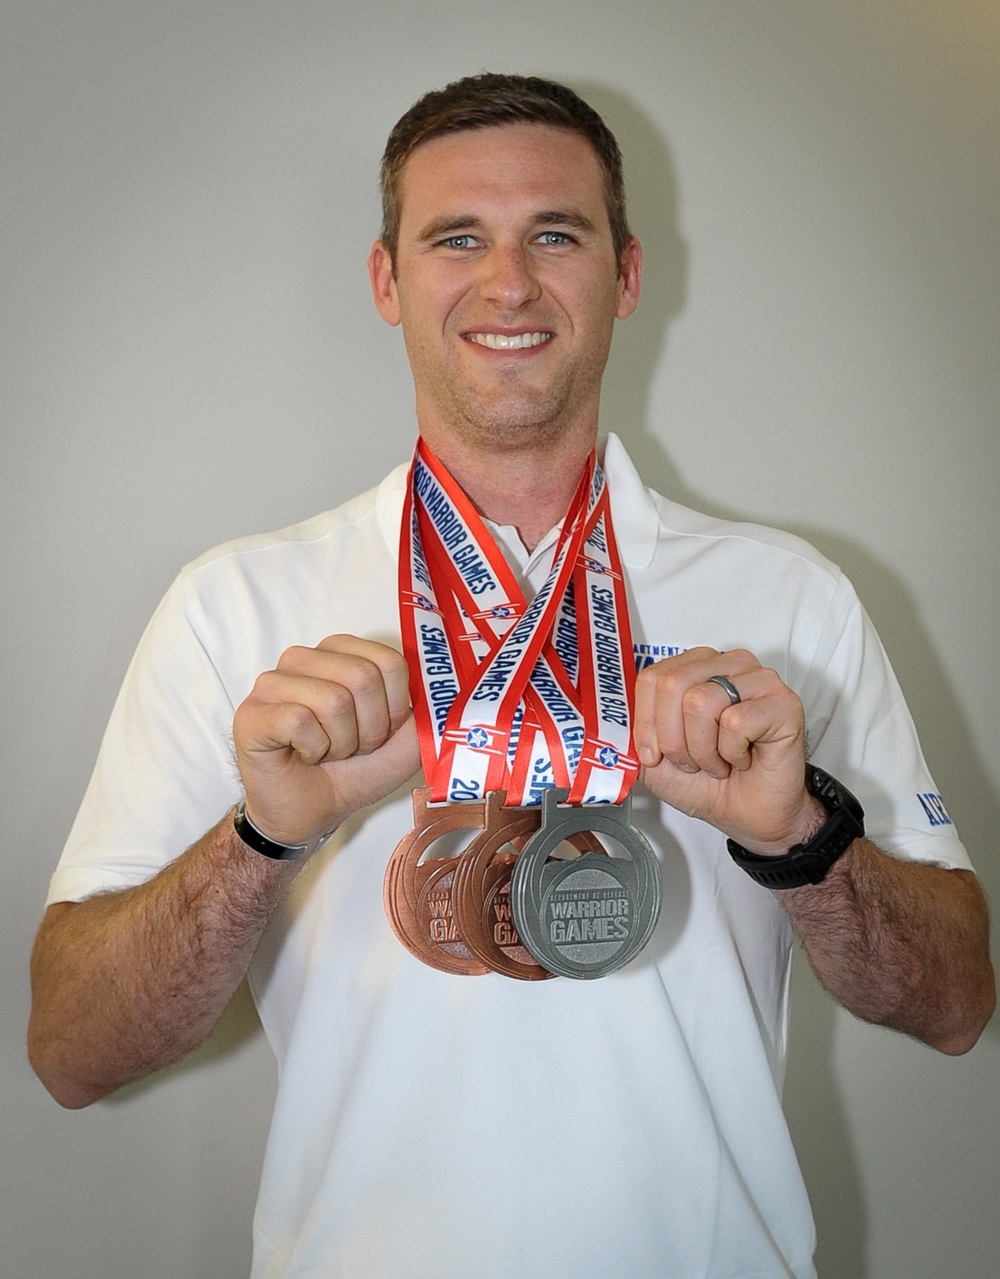 Barnhill returns from Warrior Games, earns 3 medals